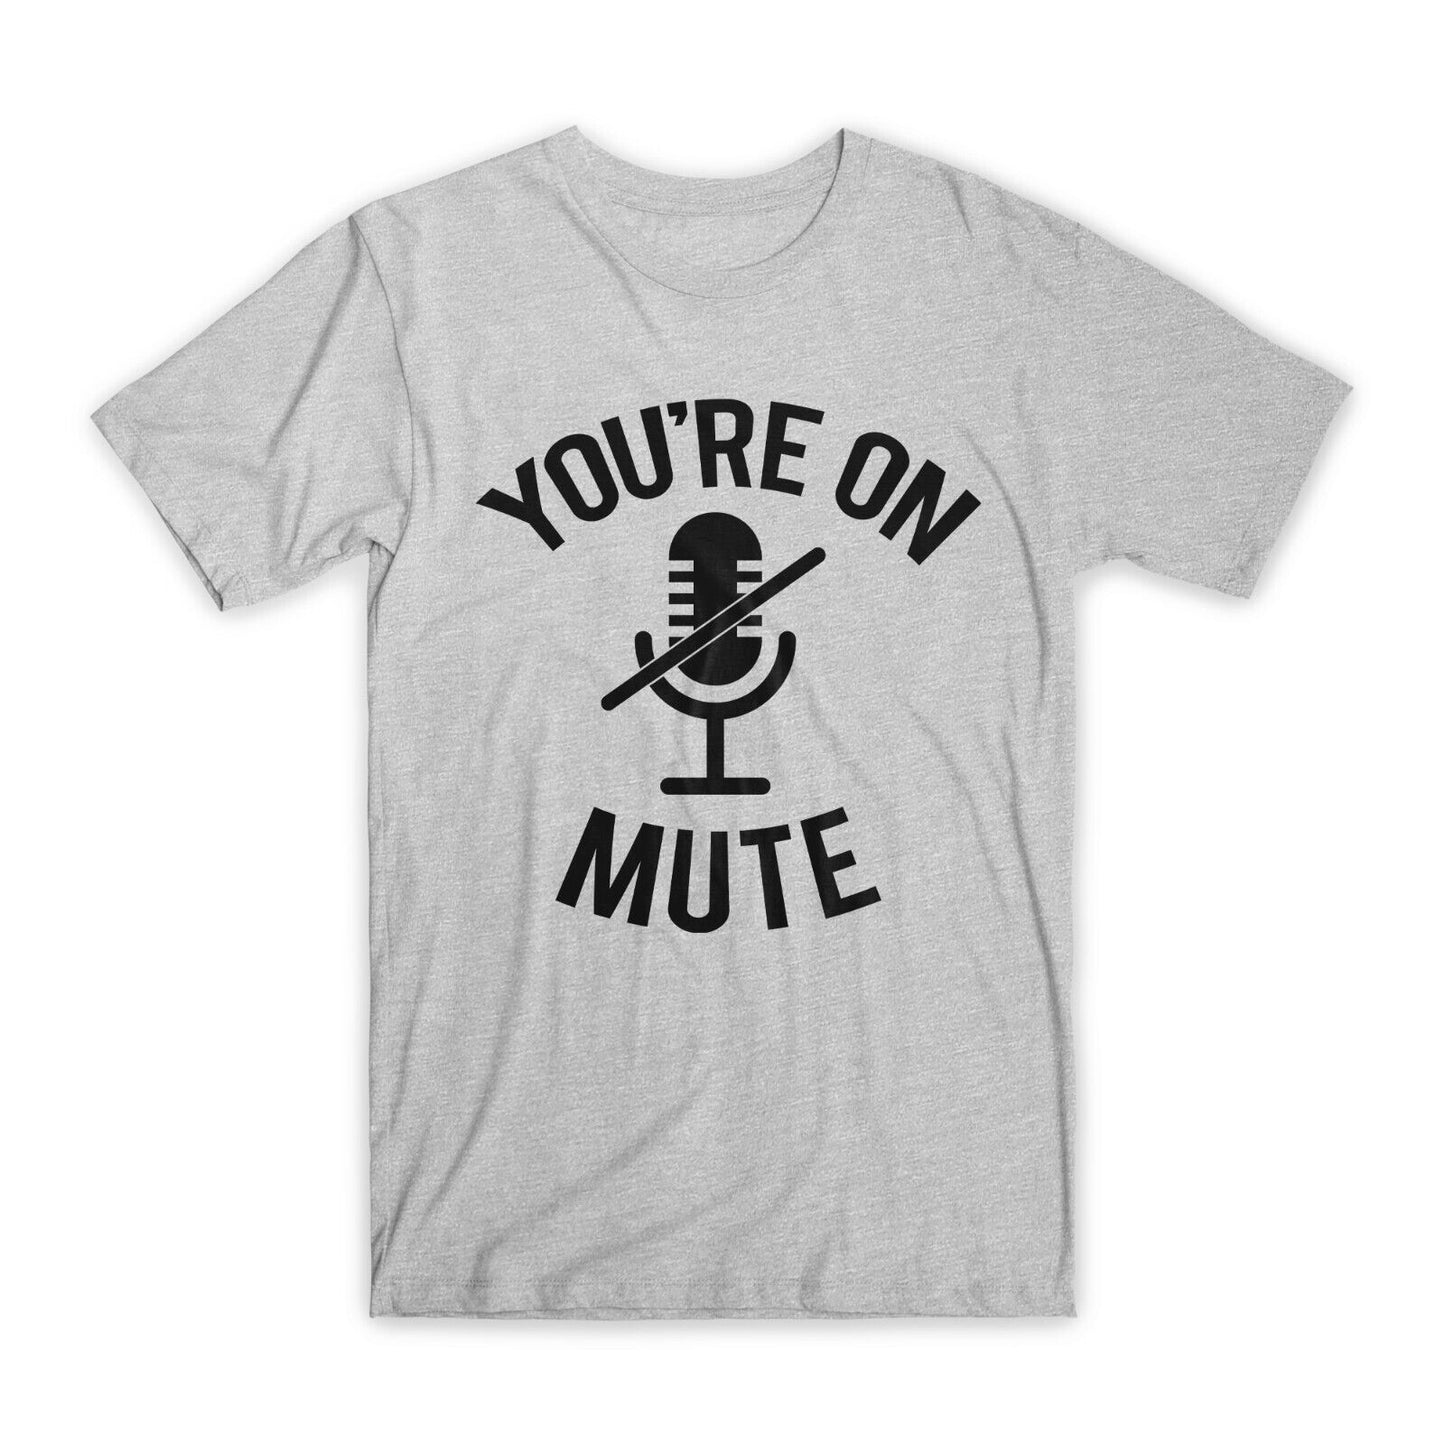 You're On Mute T-Shirt Premium Soft Cotton Crew Neck Funny Tees Novelty Gift NEW